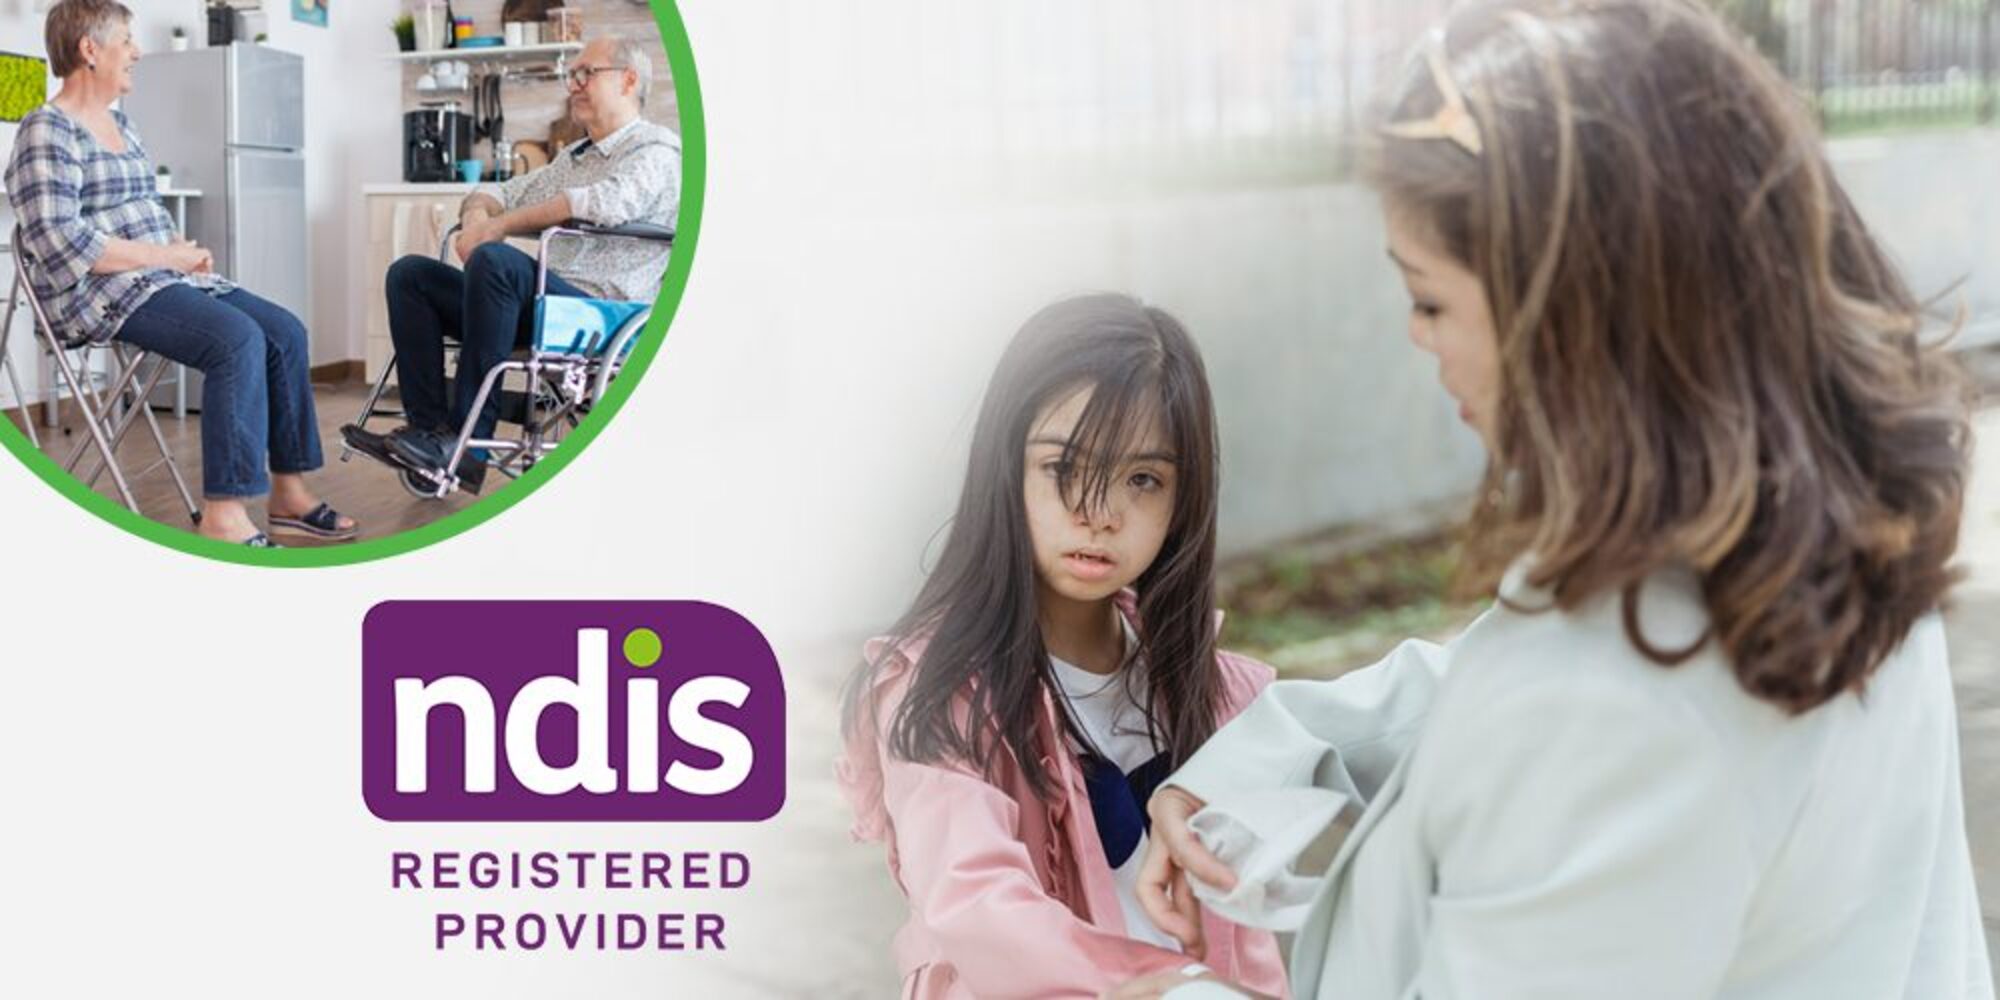 Why Choose NDIS Service Providers in Tailored Support for Individuals?